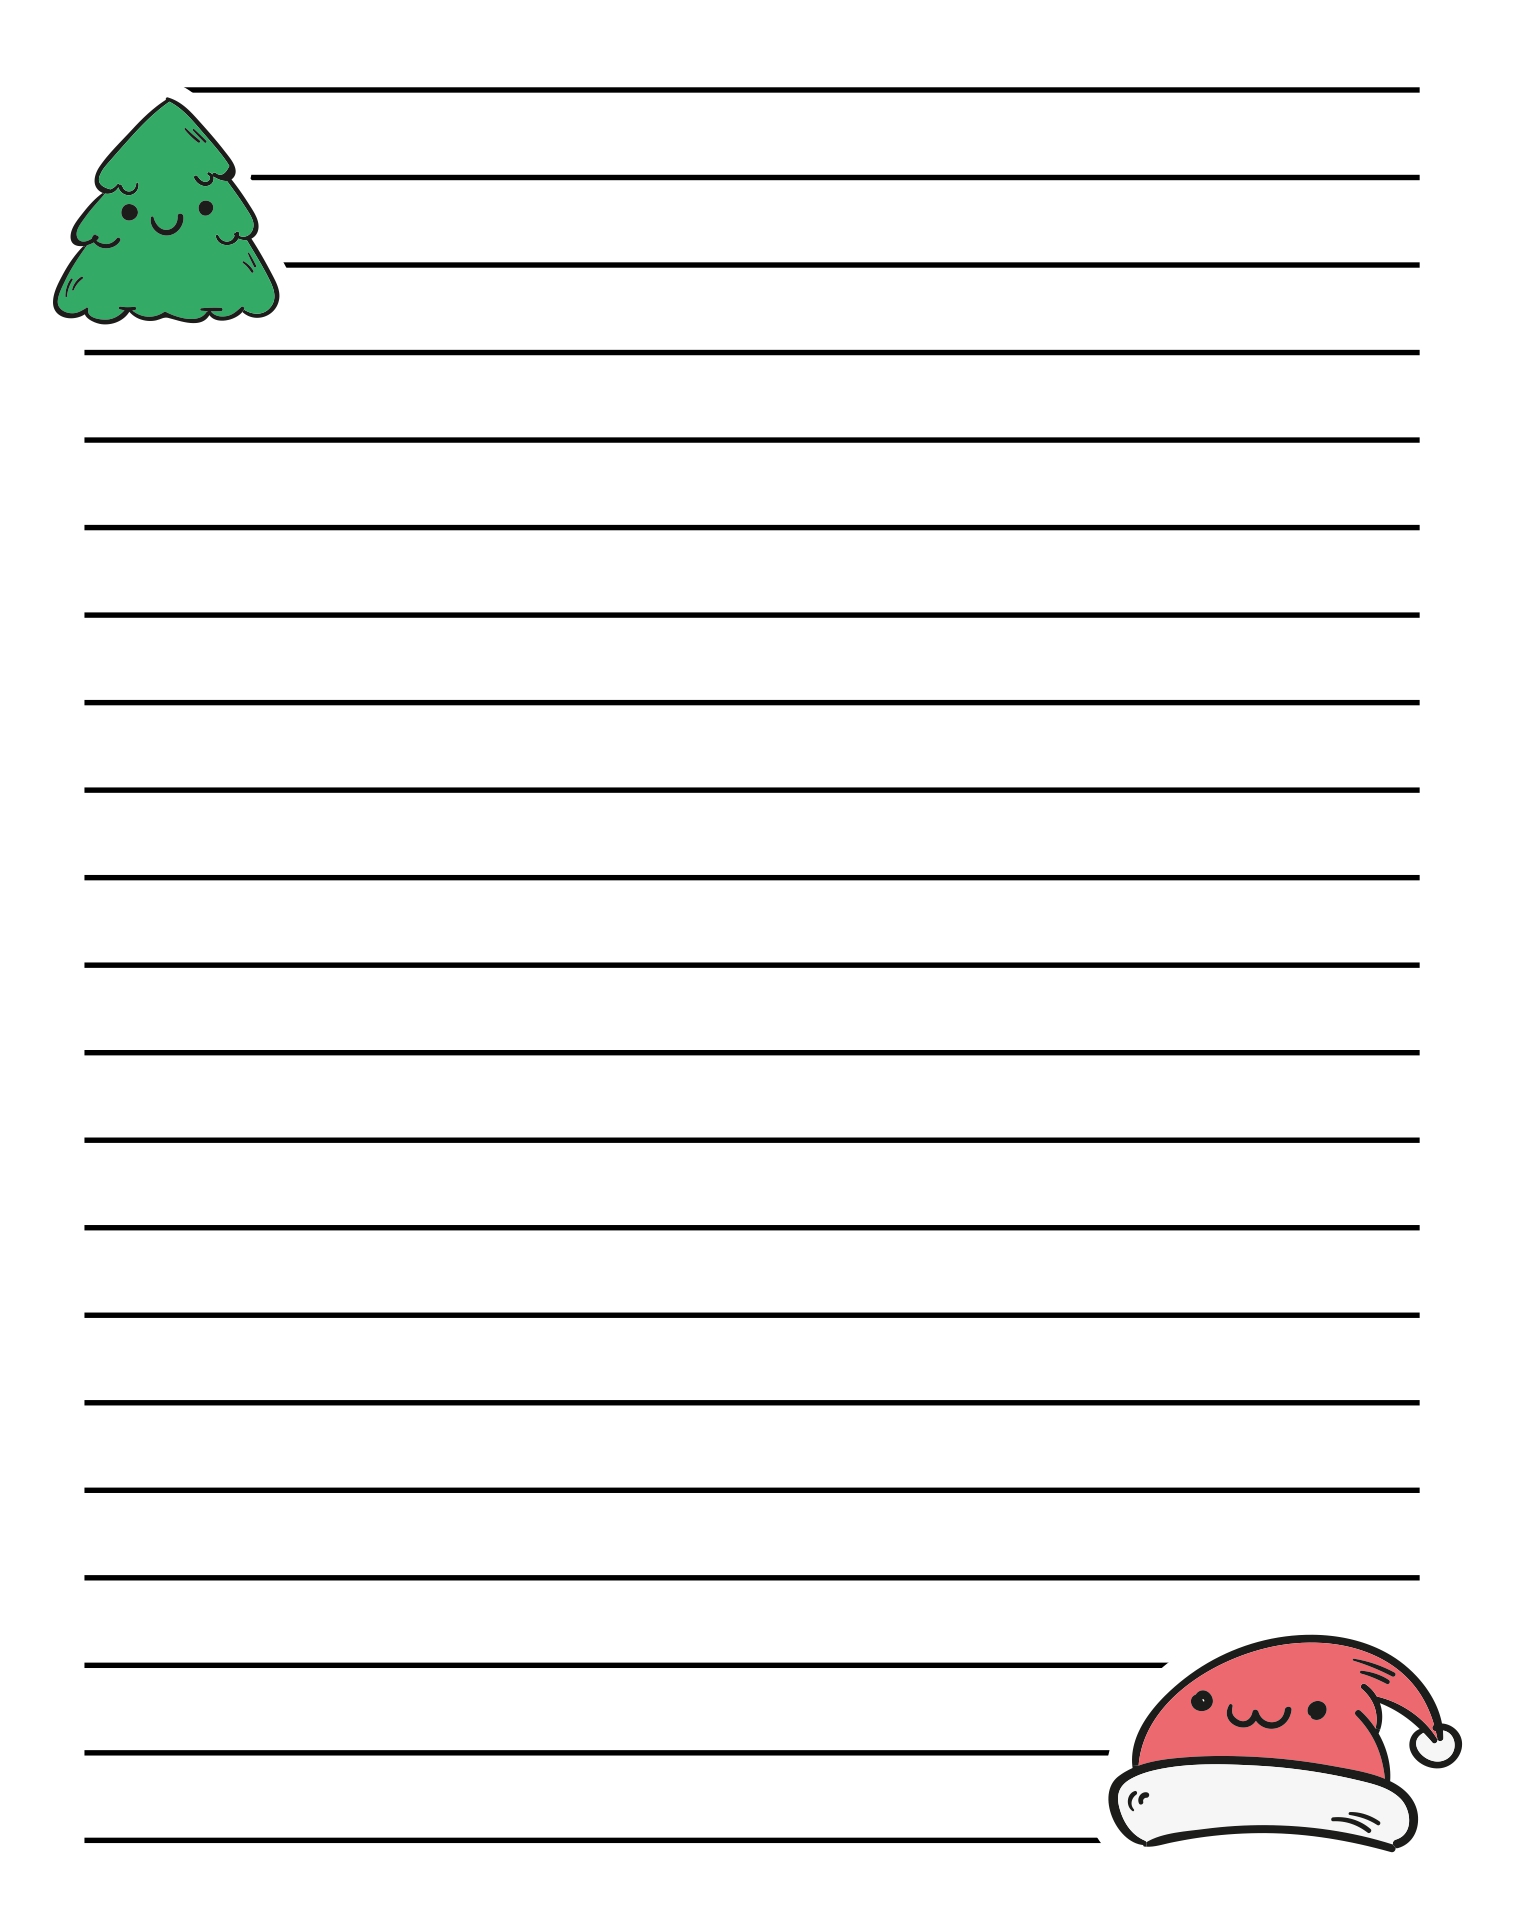 6 Best Images of Christmas Writing Paper Template Printable Christmas